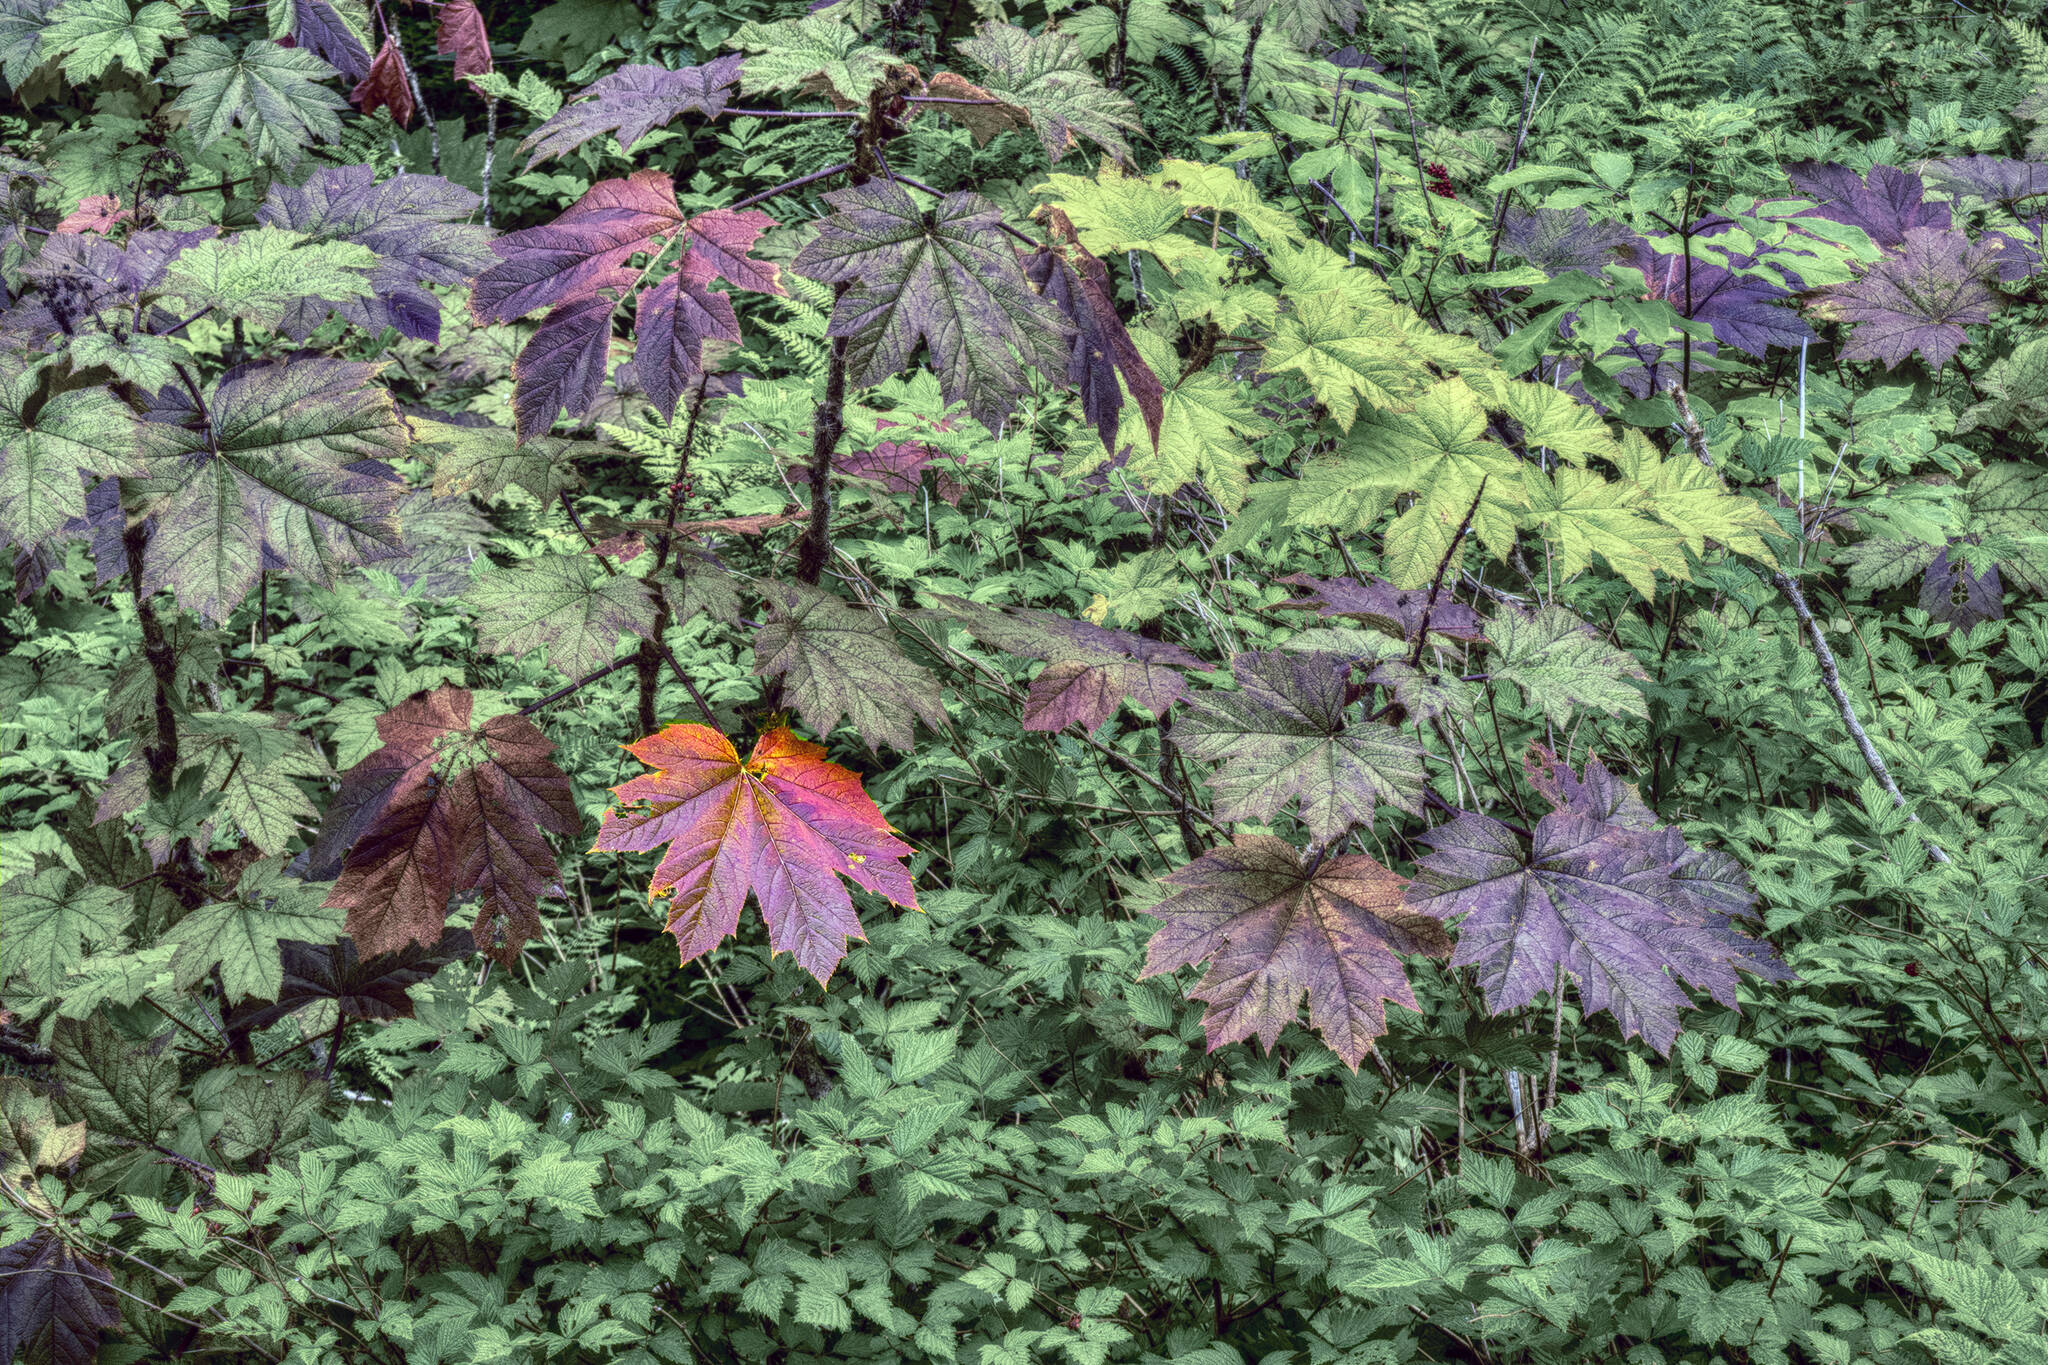 Devil’s club and other foliage in full color on July 31. (Courtesy photo / Kenneth Gill, gillfoto)